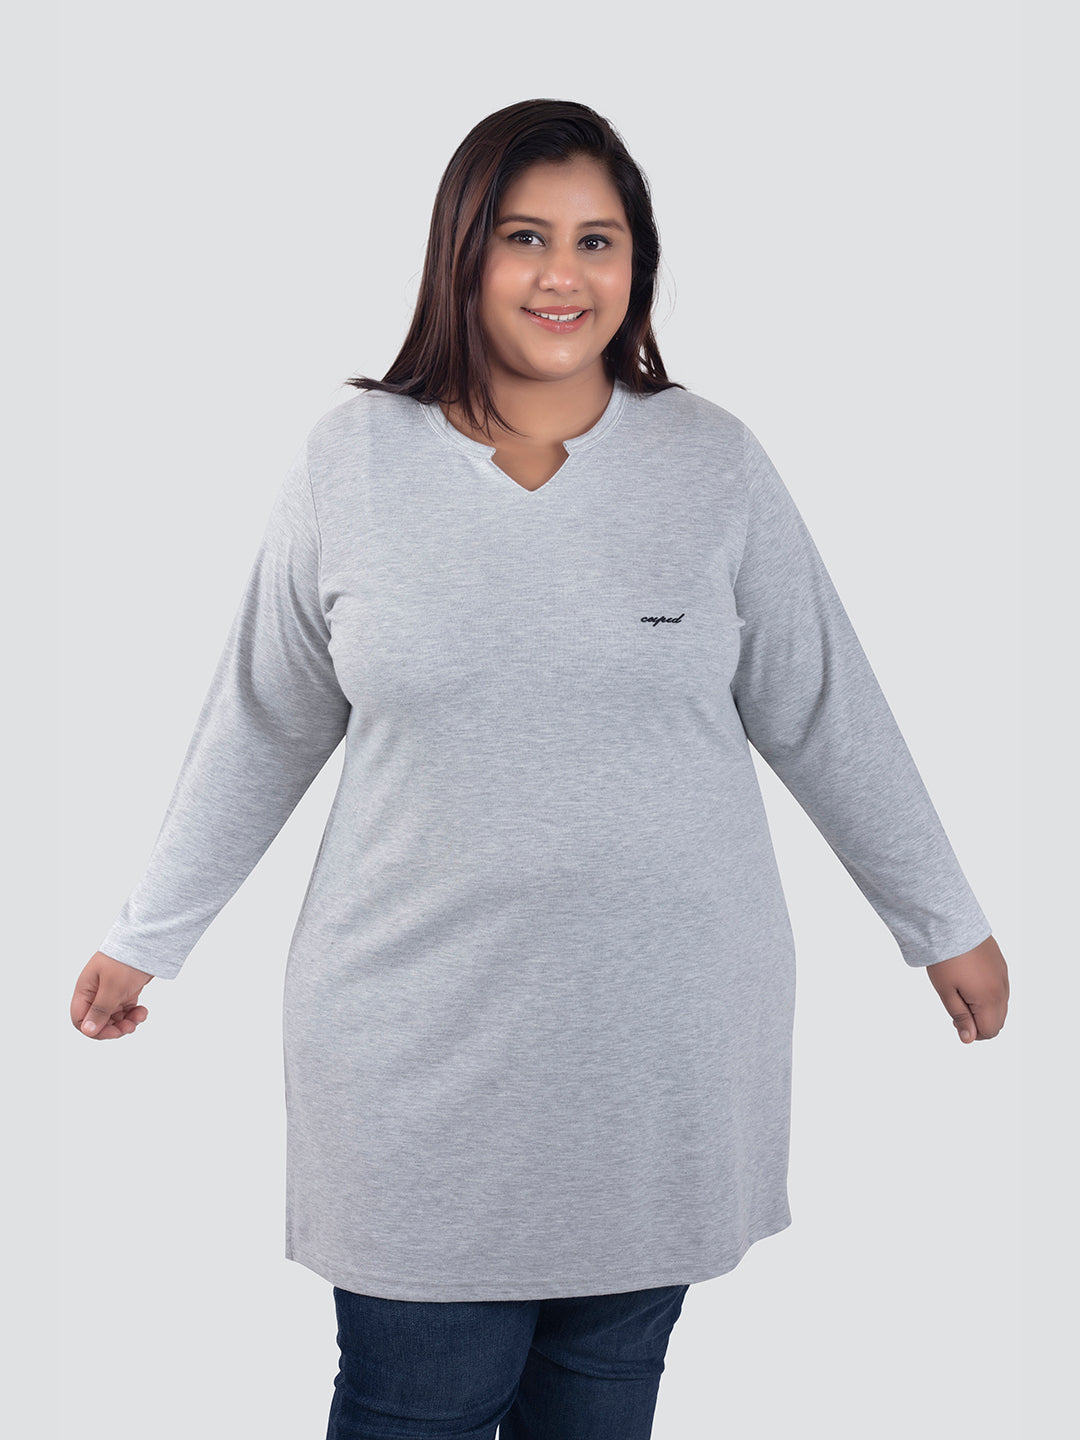 Stylish Grey Cotton Plus Size Full Sleeves Long Top For Women Online In India